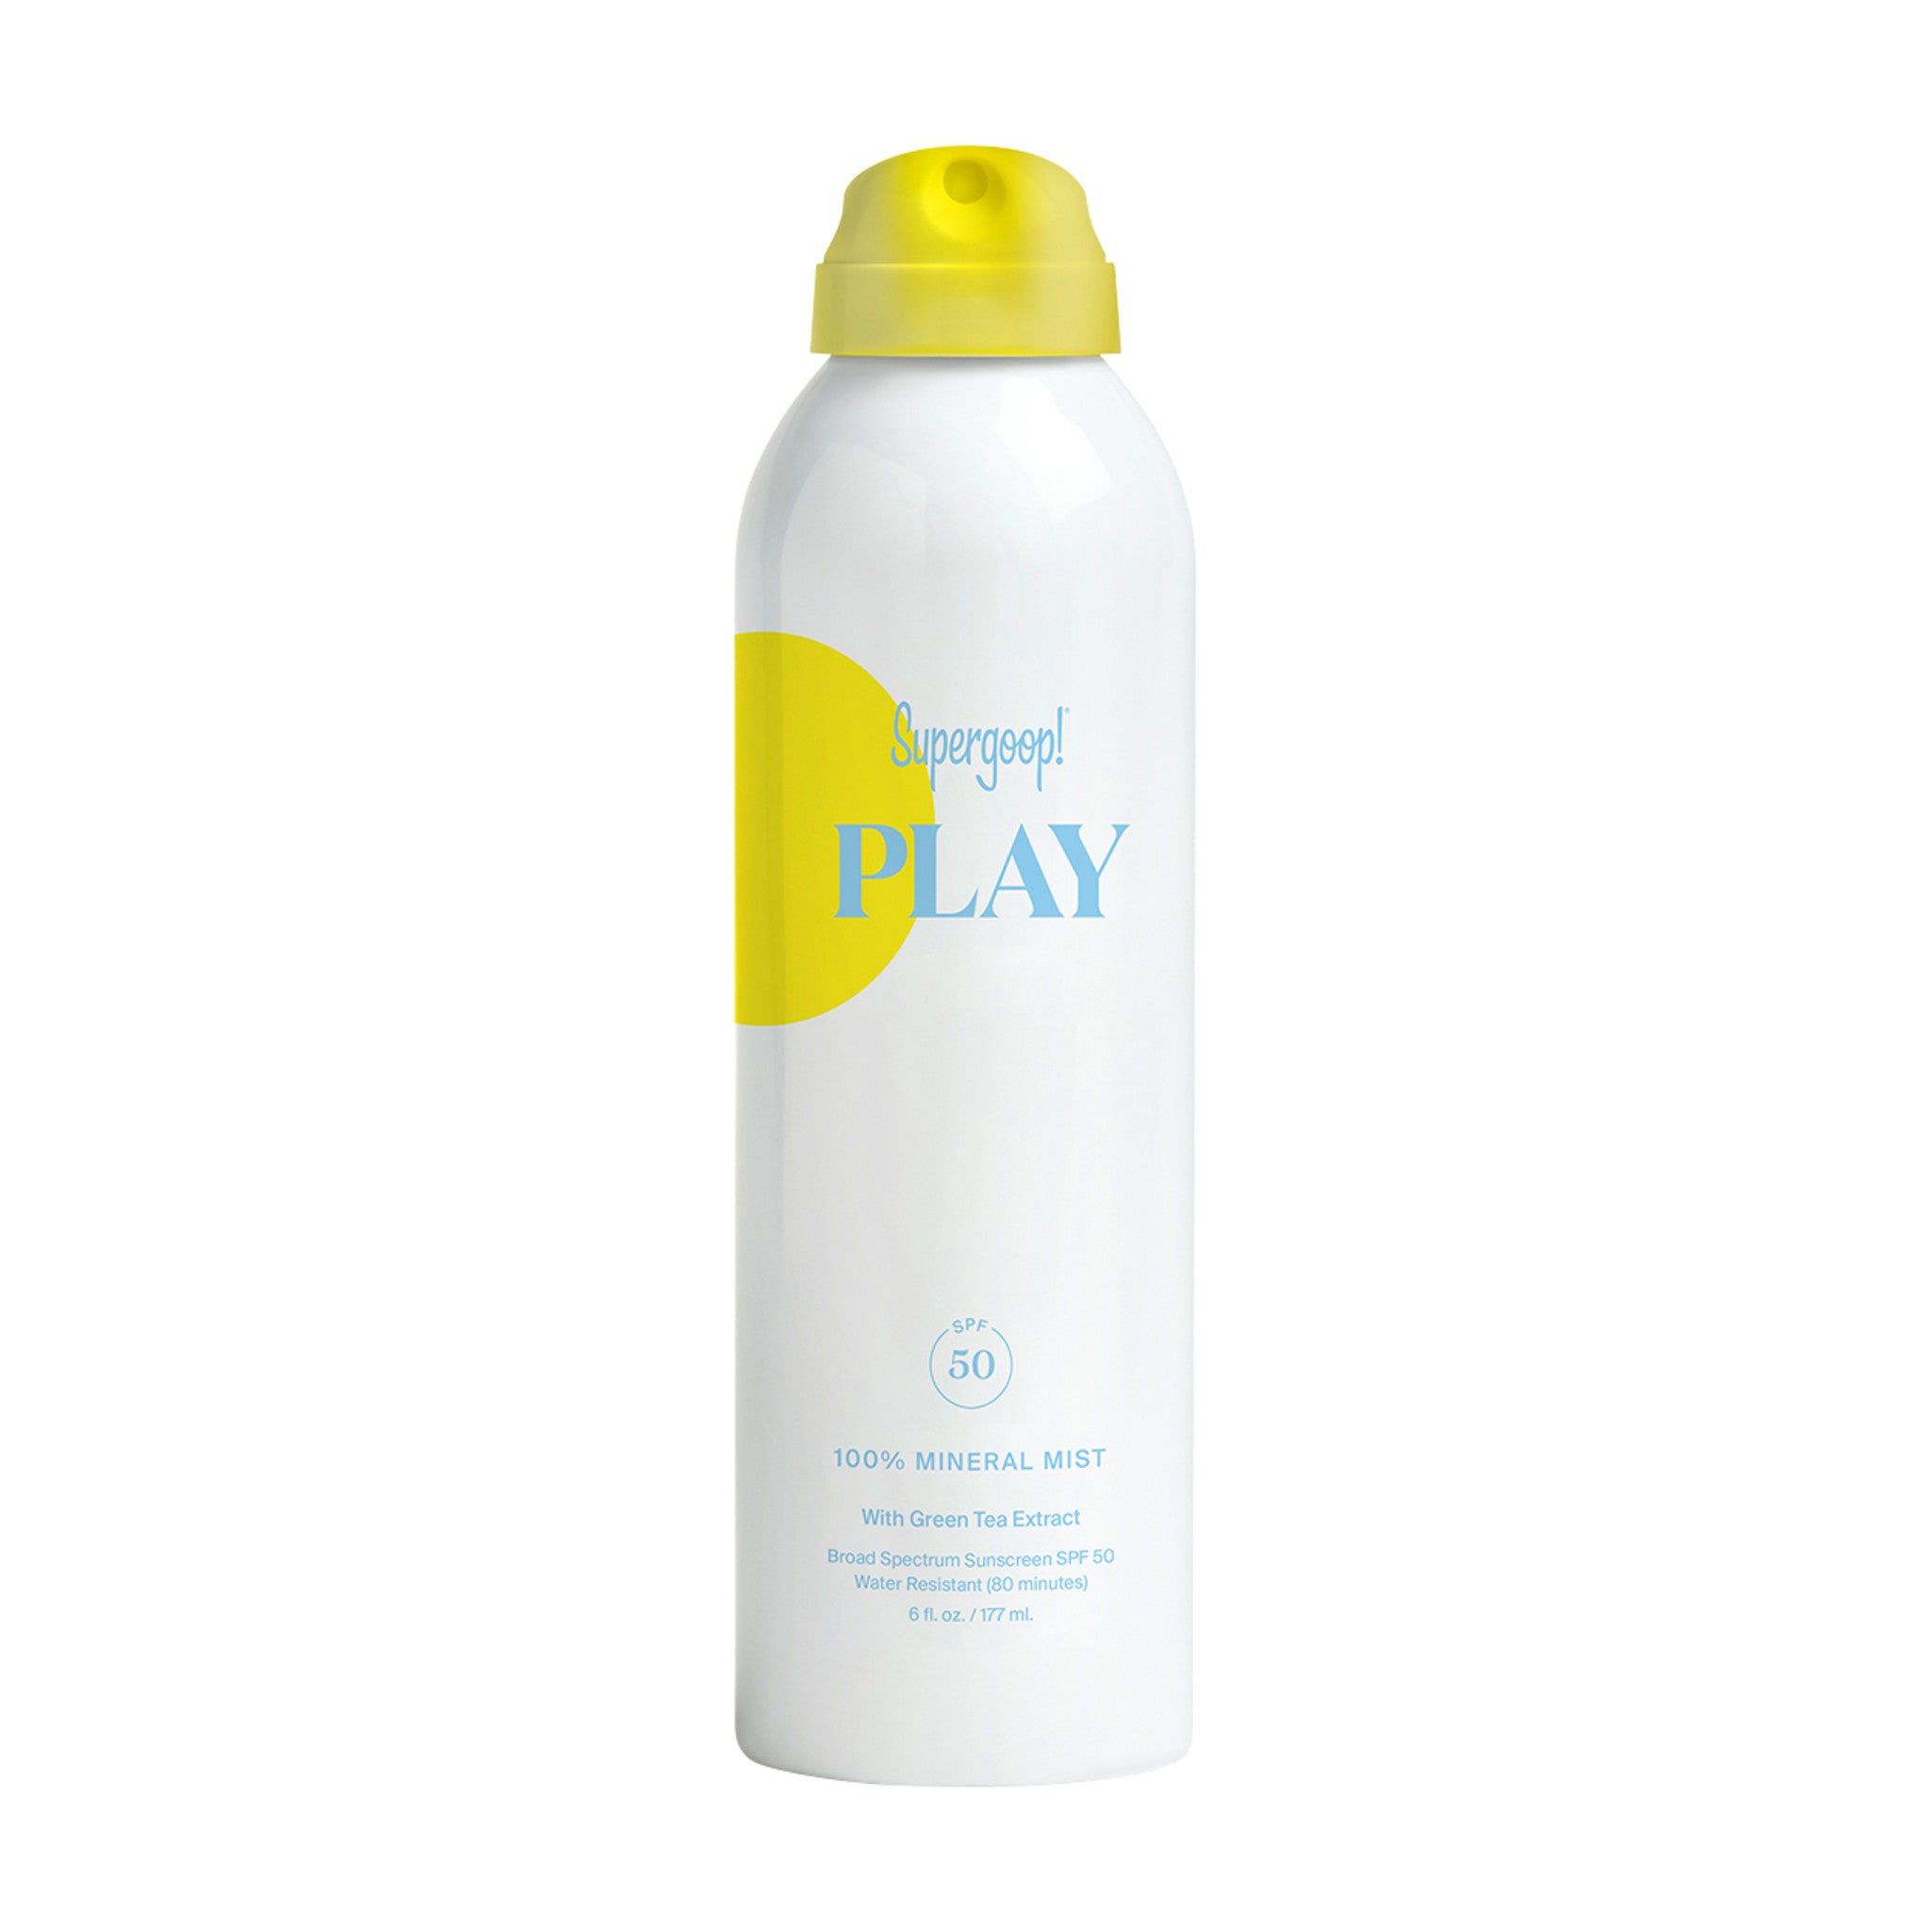 SUPERGOOP PLAY 100% MINERAL BODY MIST SPF 50 WITH GREEN TEA EXTRACT